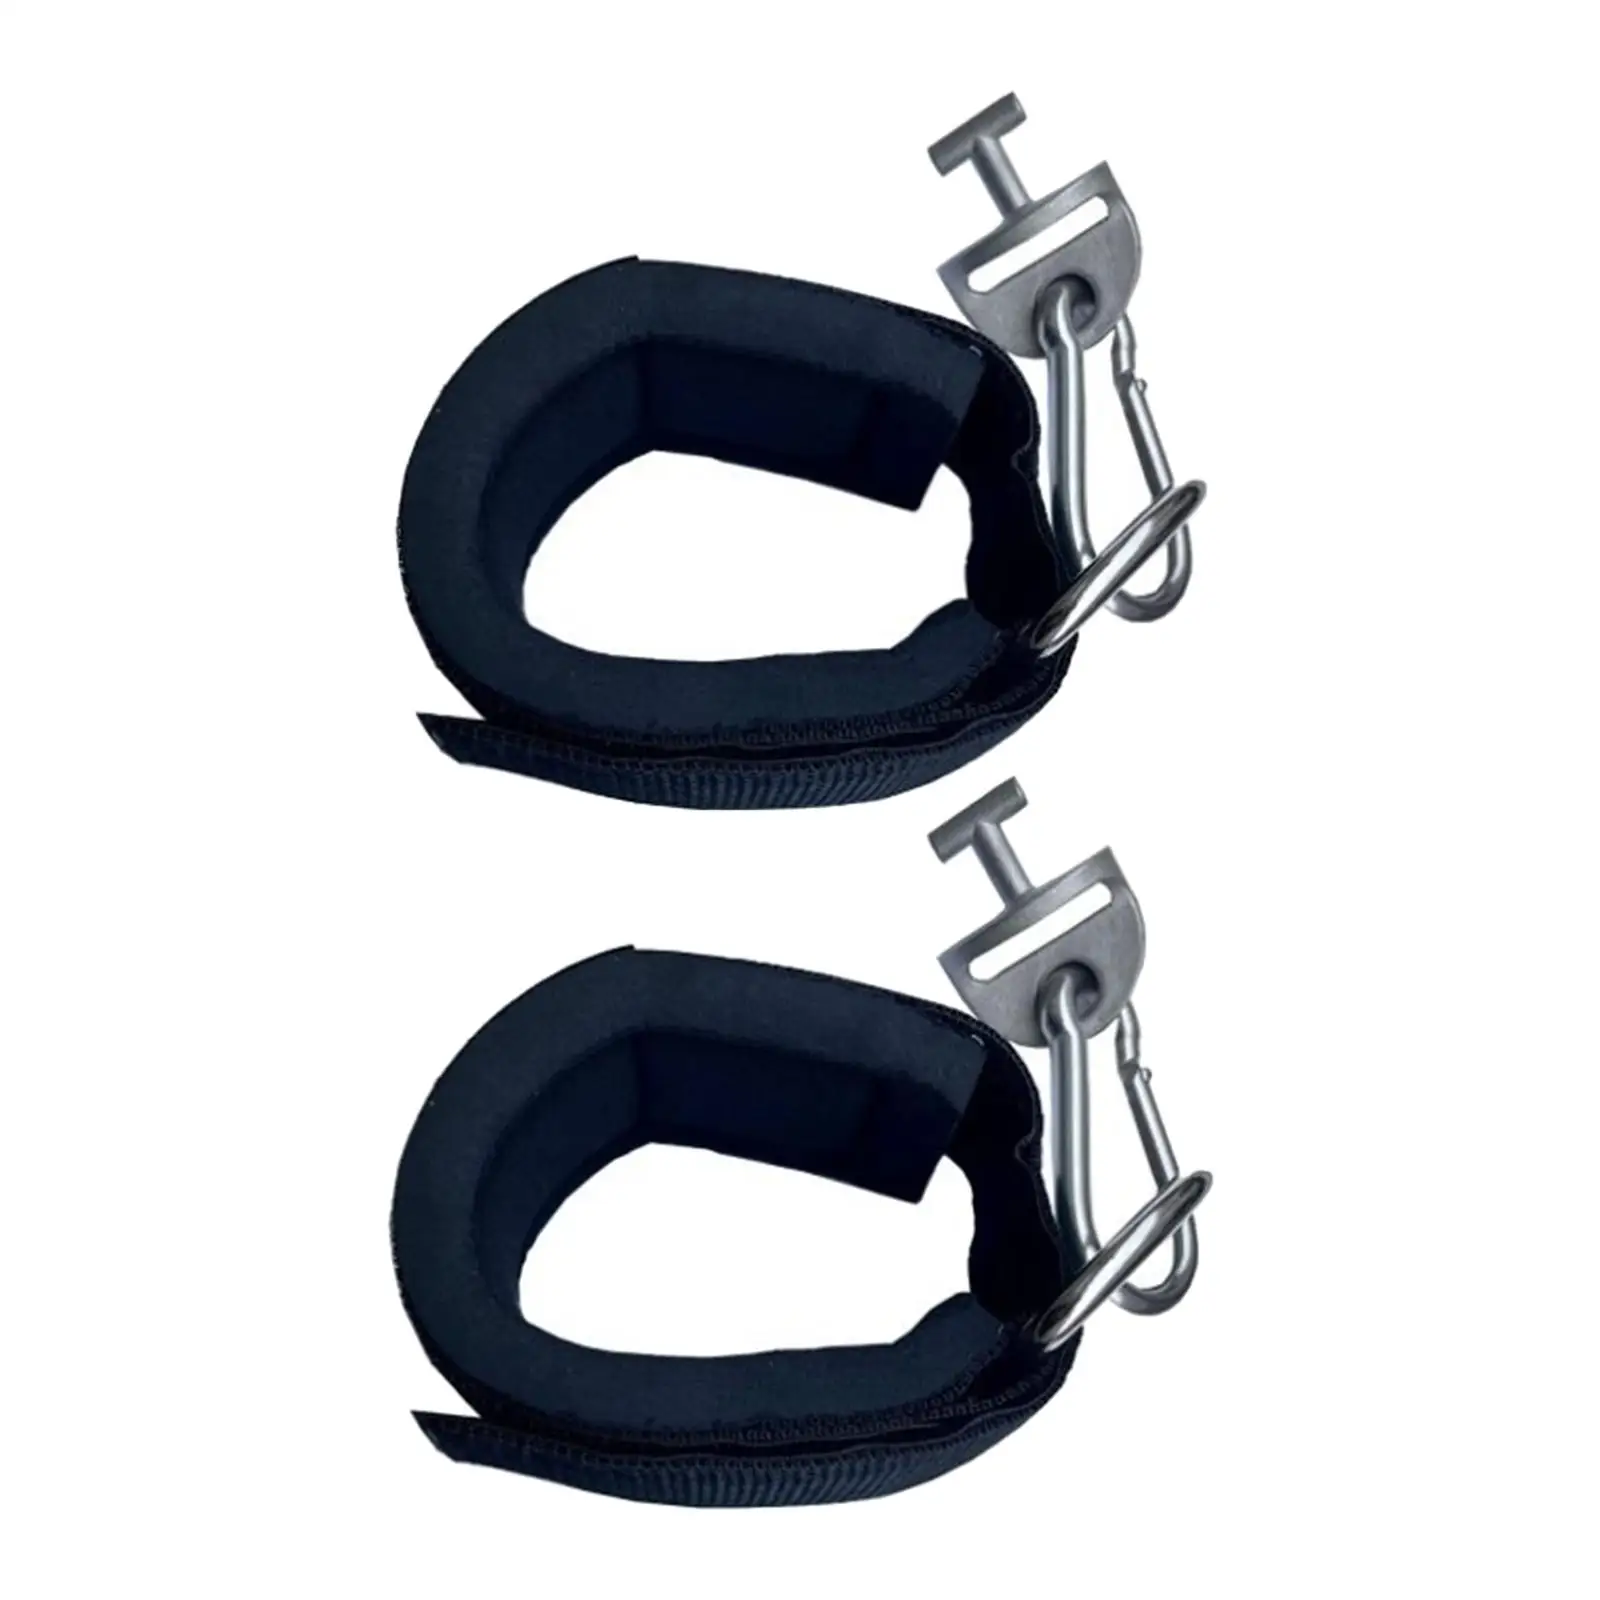 Ankle Straps with Snap Hooks Adjustable Tonal Attachment Ankle Cuff for Leg